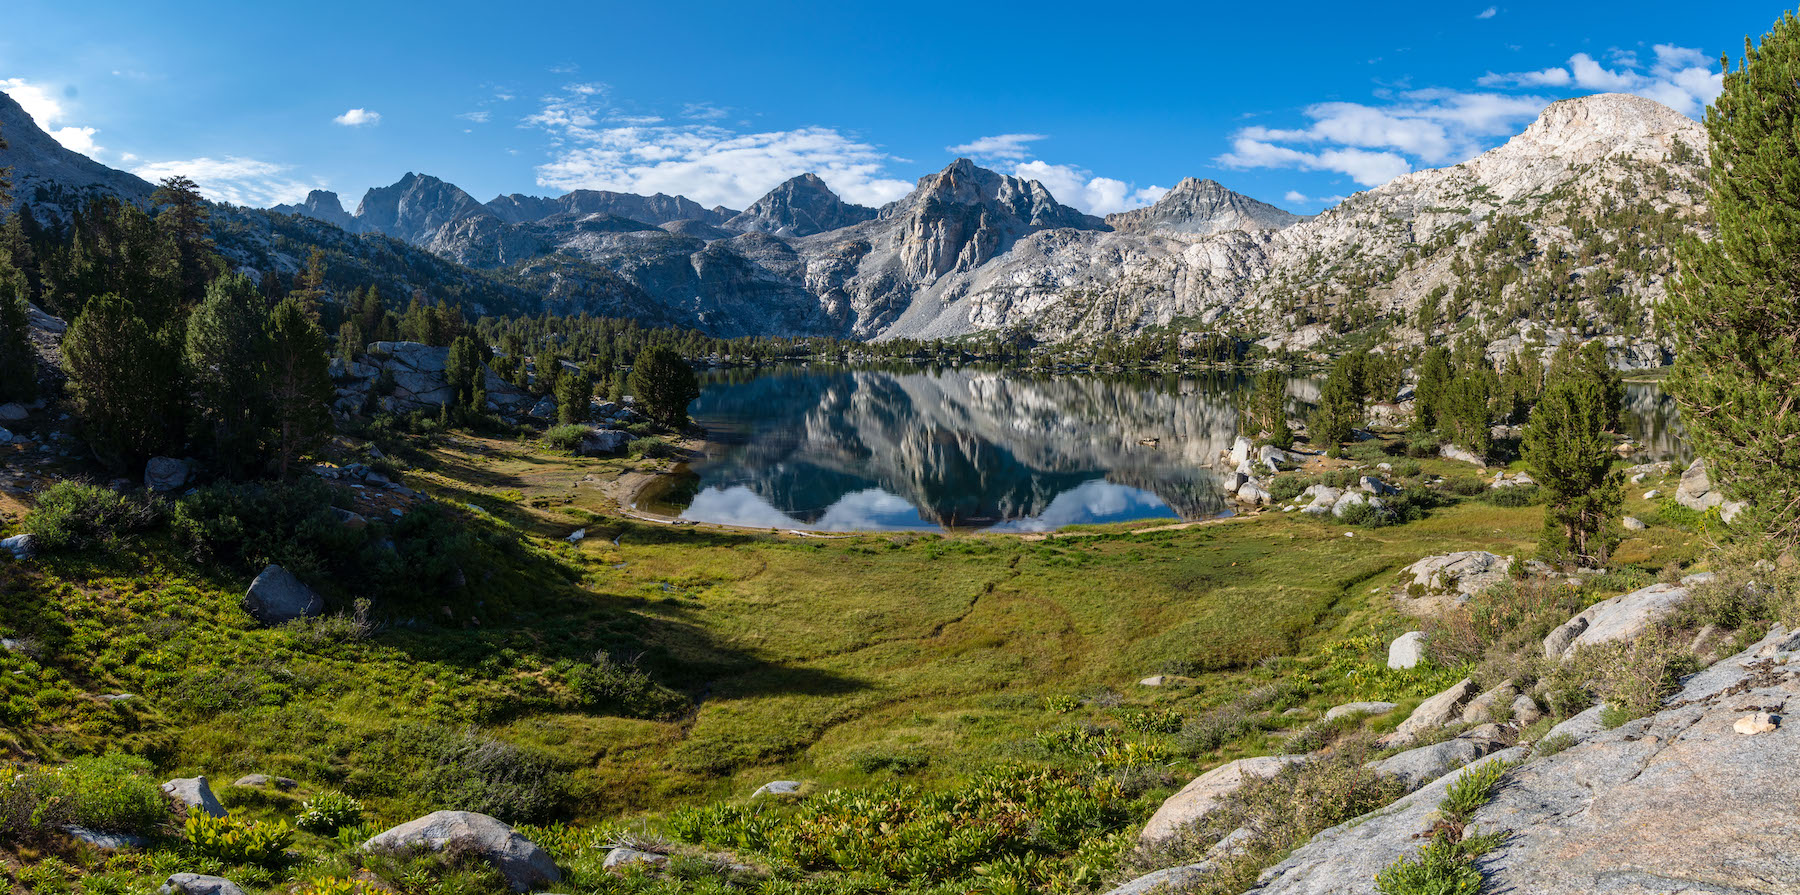 Morning View over a meadow of Rae Lakes, Kings Canyon National Park